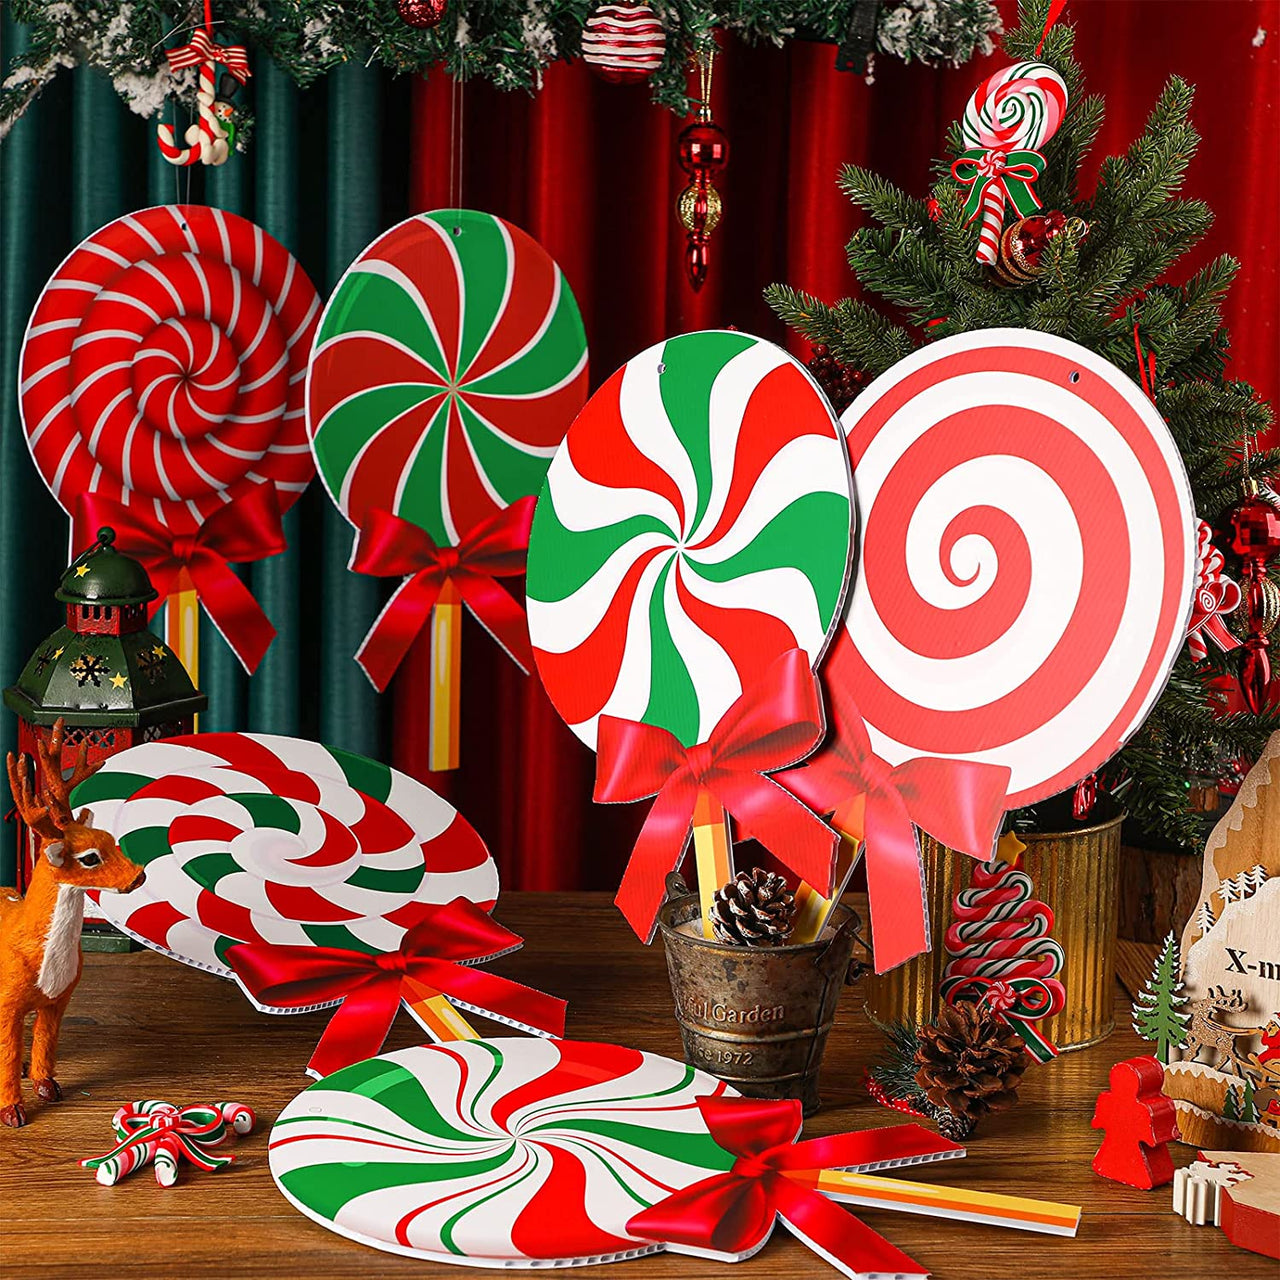 12 Pieces Christmas Yard Signs 16 Inch Outdoor Double Sided Lawn Candy Decorations Christmas Candy Hanging Ornaments Outside Holiday Party Porch and Tree Yard Lawn Home Office Decor